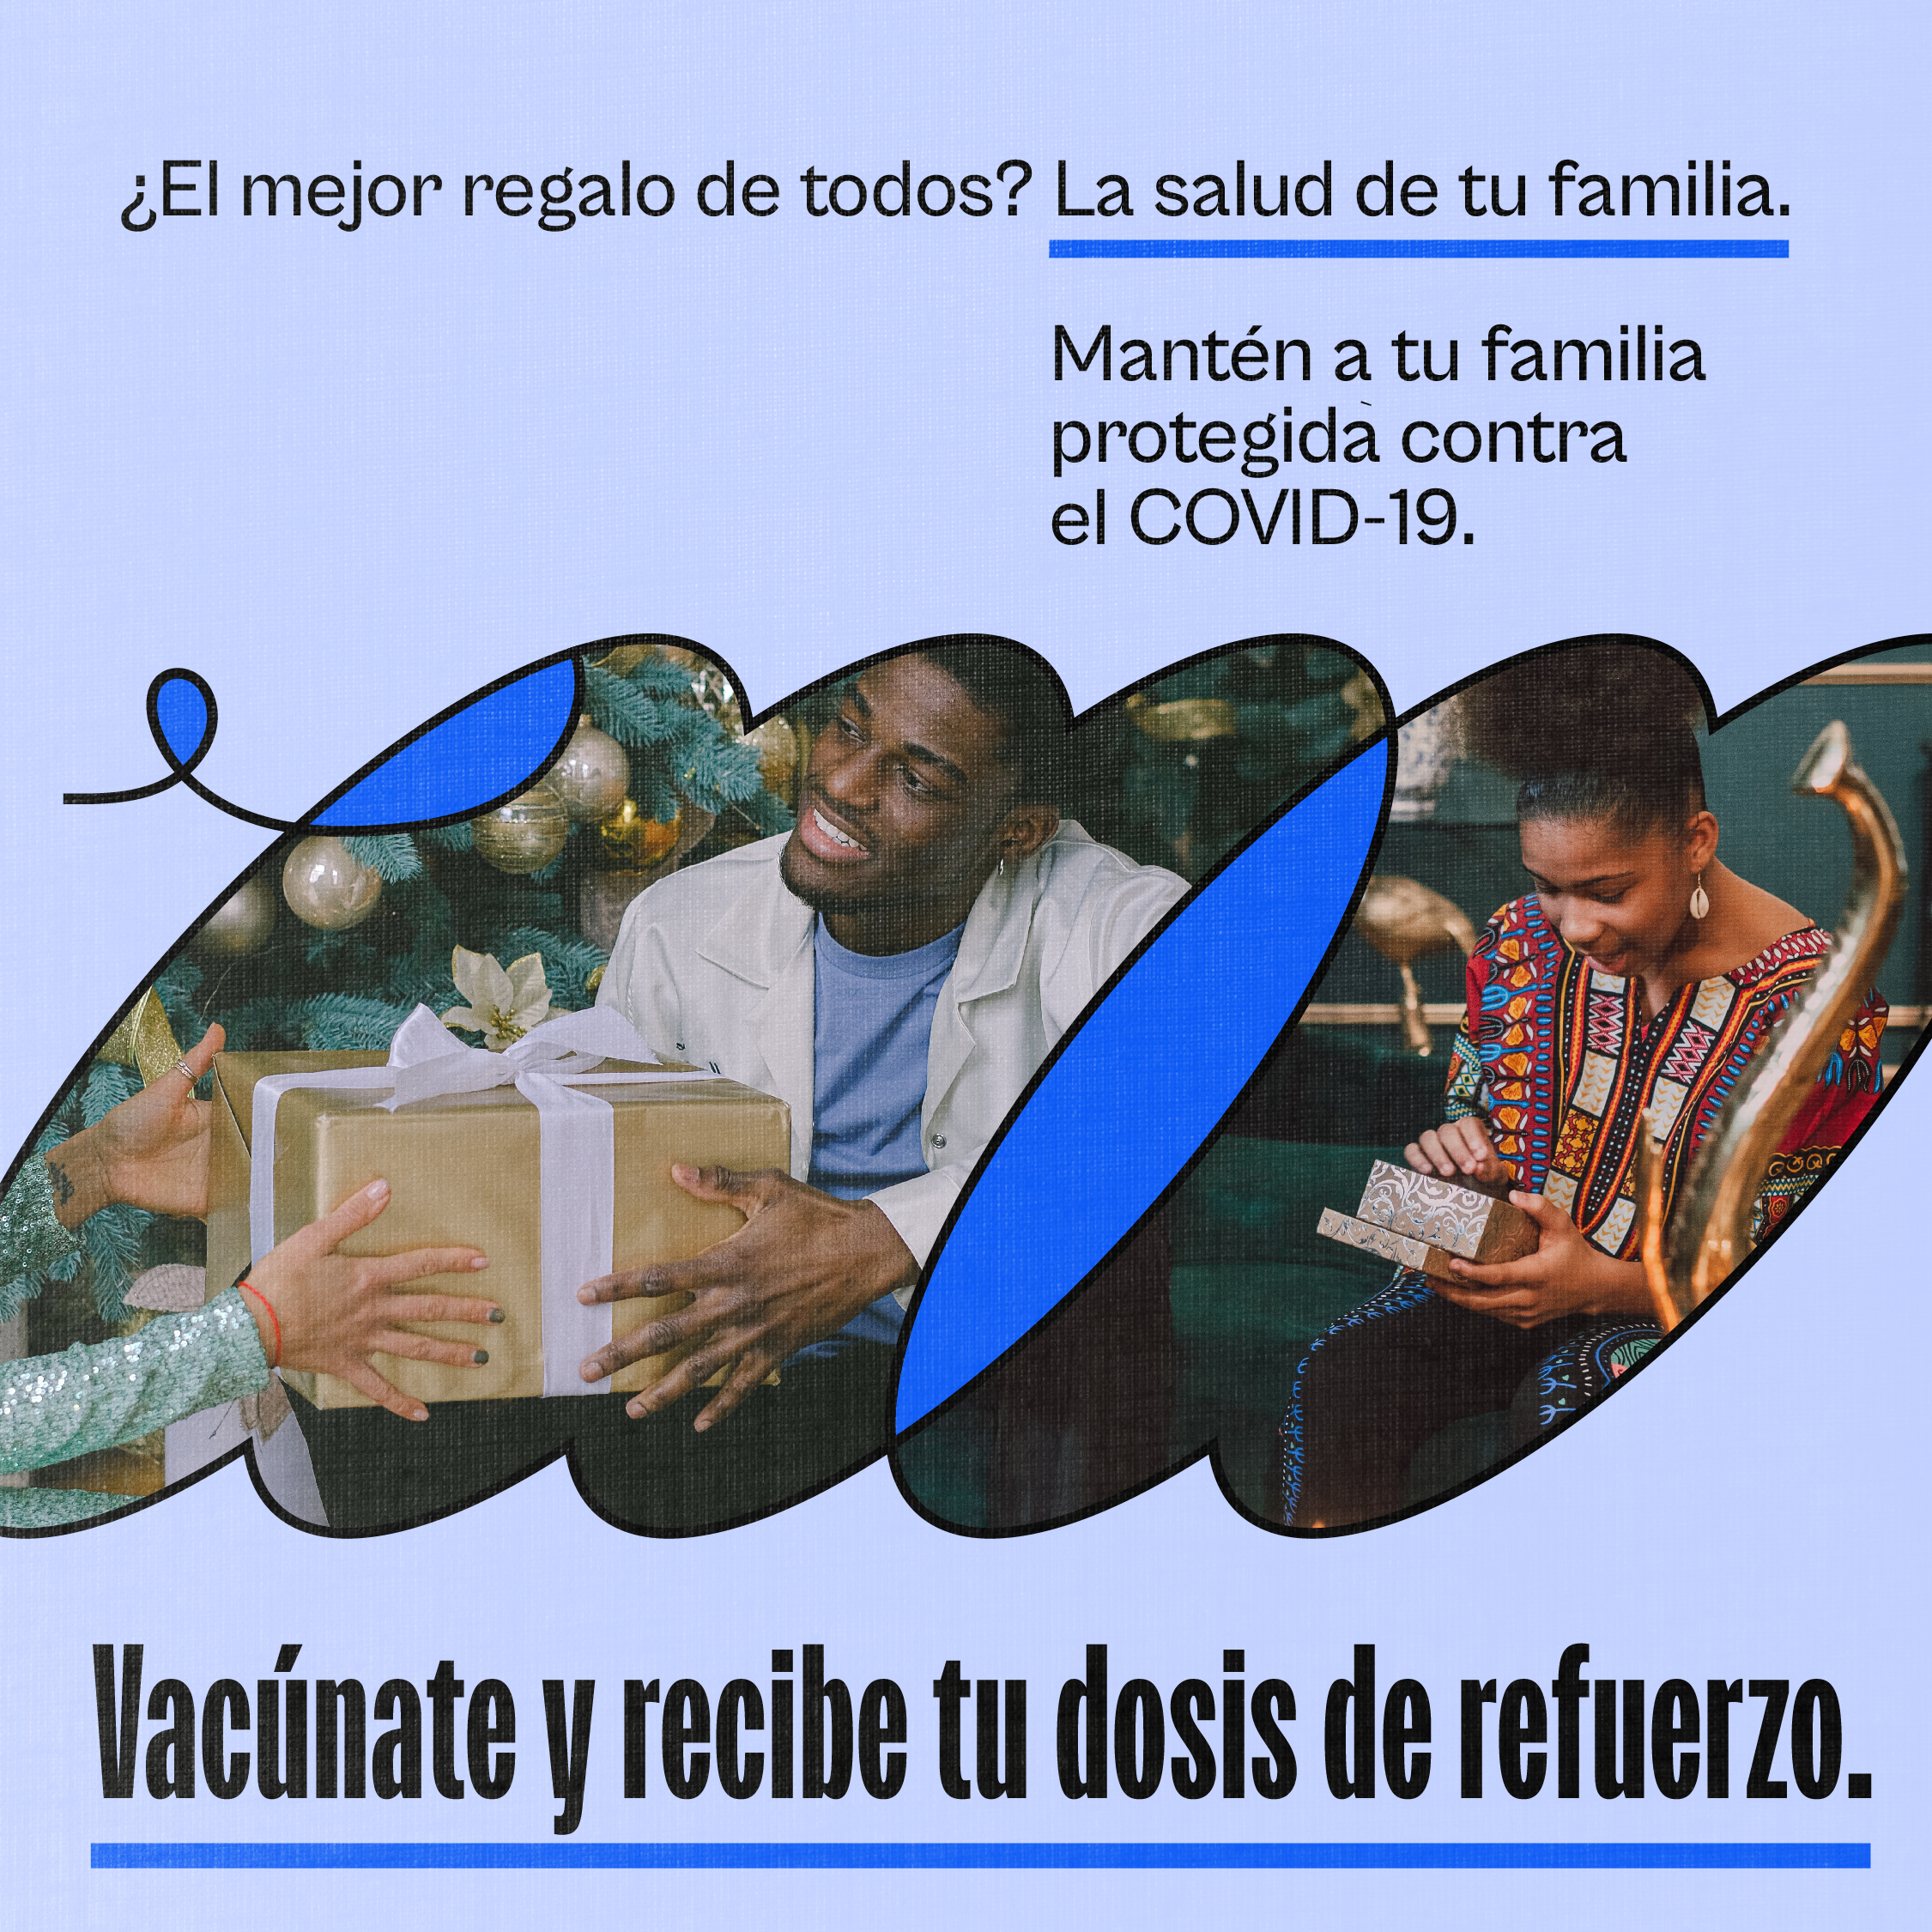 Two images of Black adults (one man, one woman) receiving gifts for the holiday. Spanish text reads, "The best gift of all? Your family’s health. Keep your family protected against COVID-19. Get vaccinated and boosted."